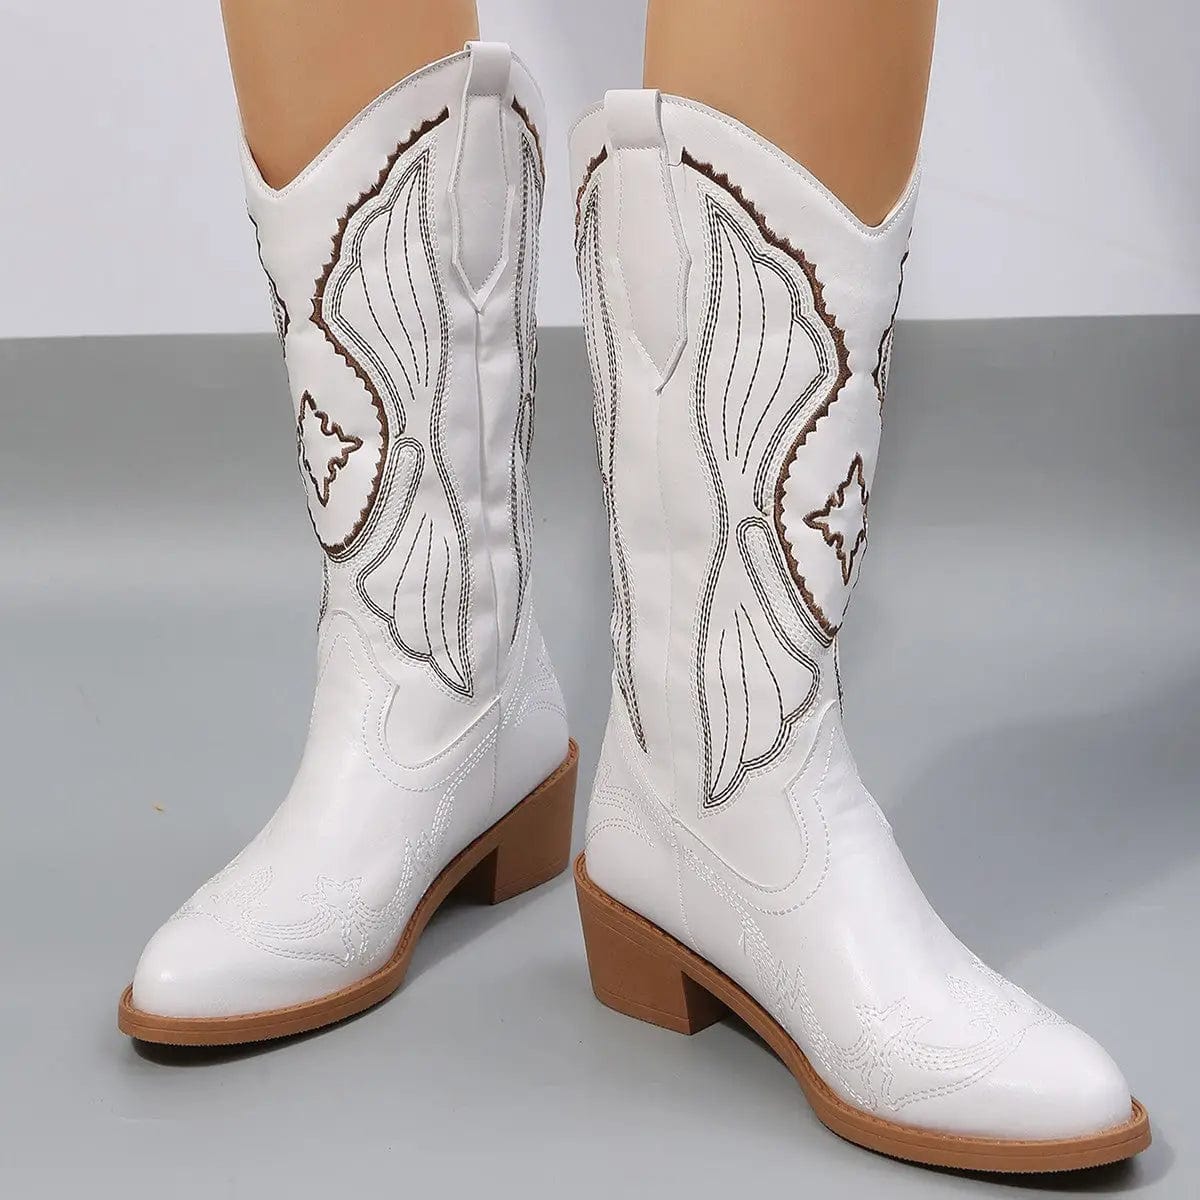 LOVEMI  Bottes White / 5 Lovemi -  Western Cowboy Boots Women Wing Embroidery Shoes Low Heel